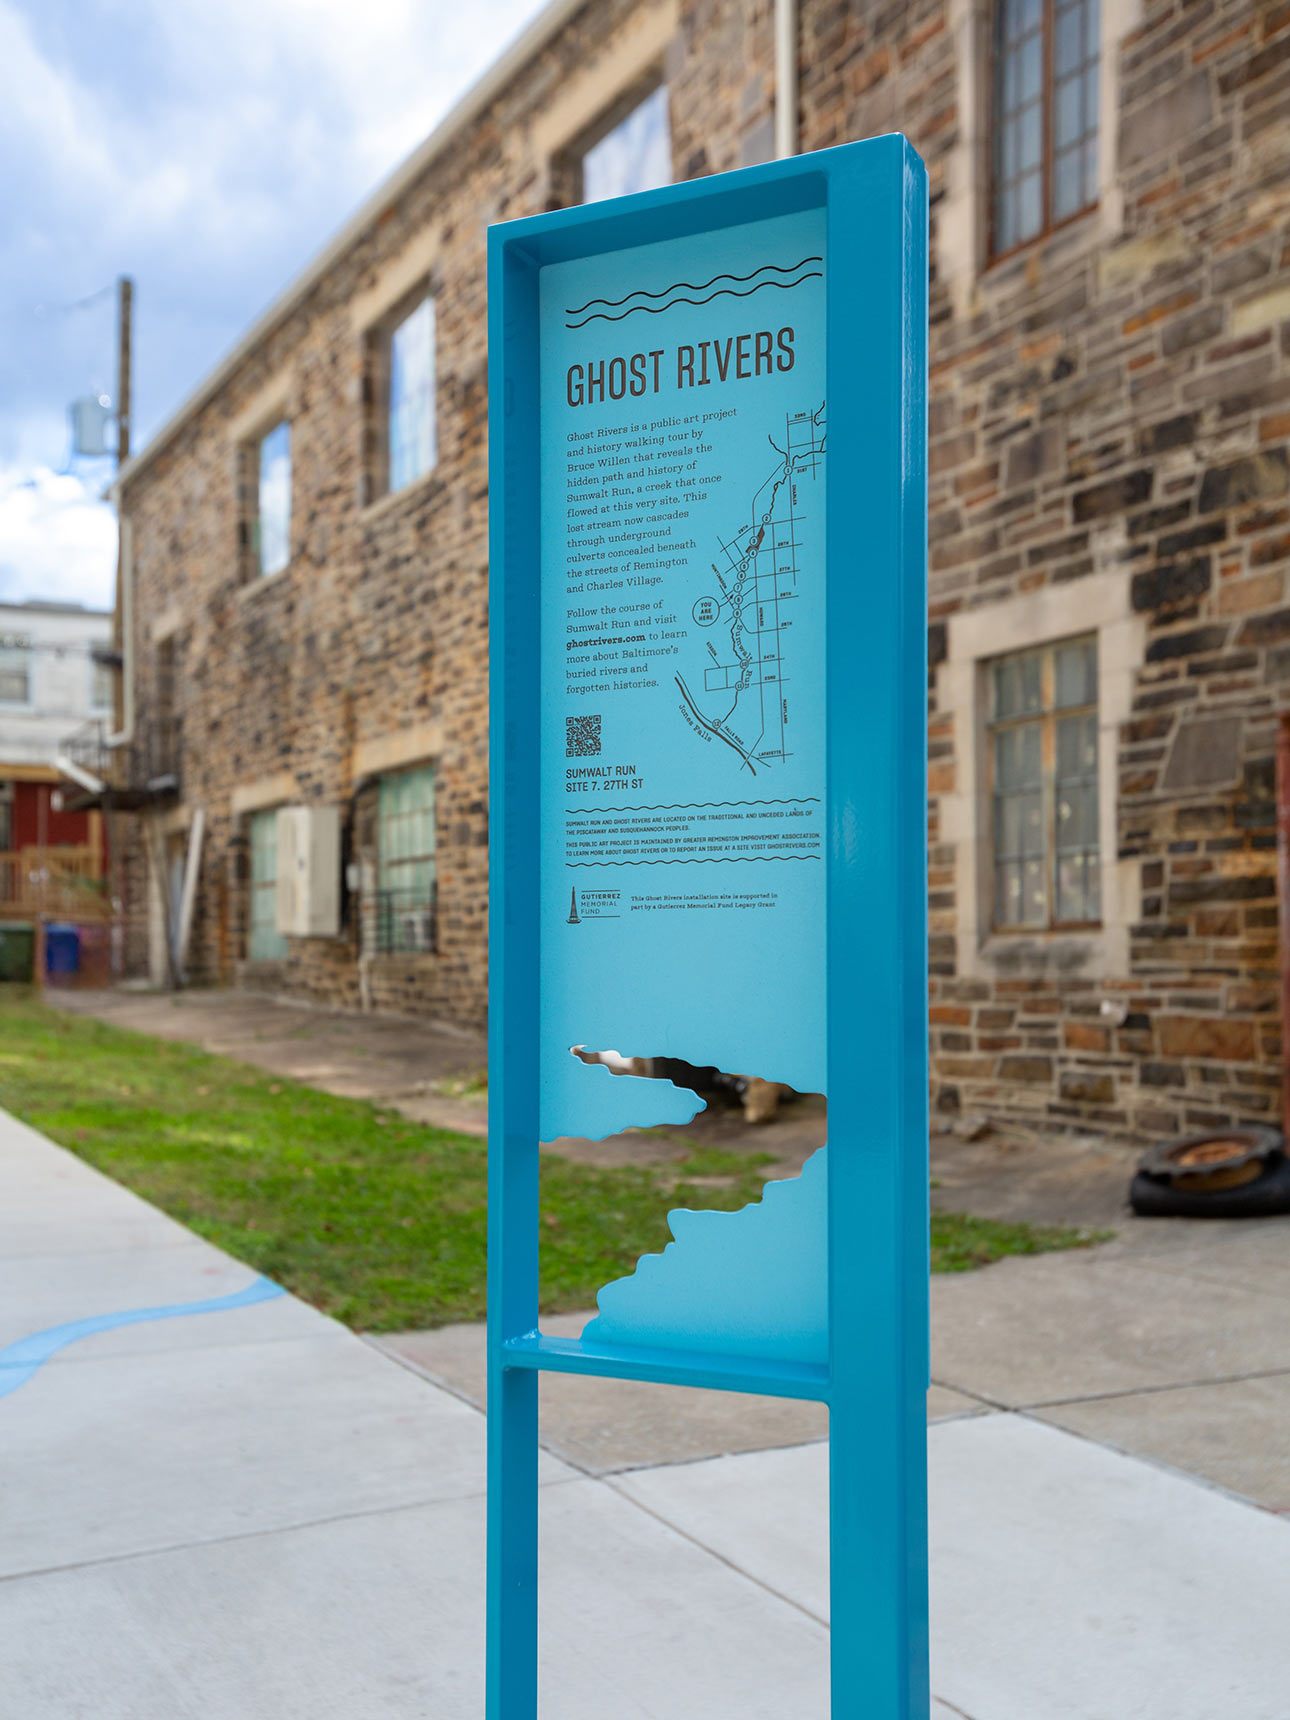 A photo of a tall blue interpretive sign with the form of a river cut out from the bottom of the sign panel. A large stone building is visible in the background.